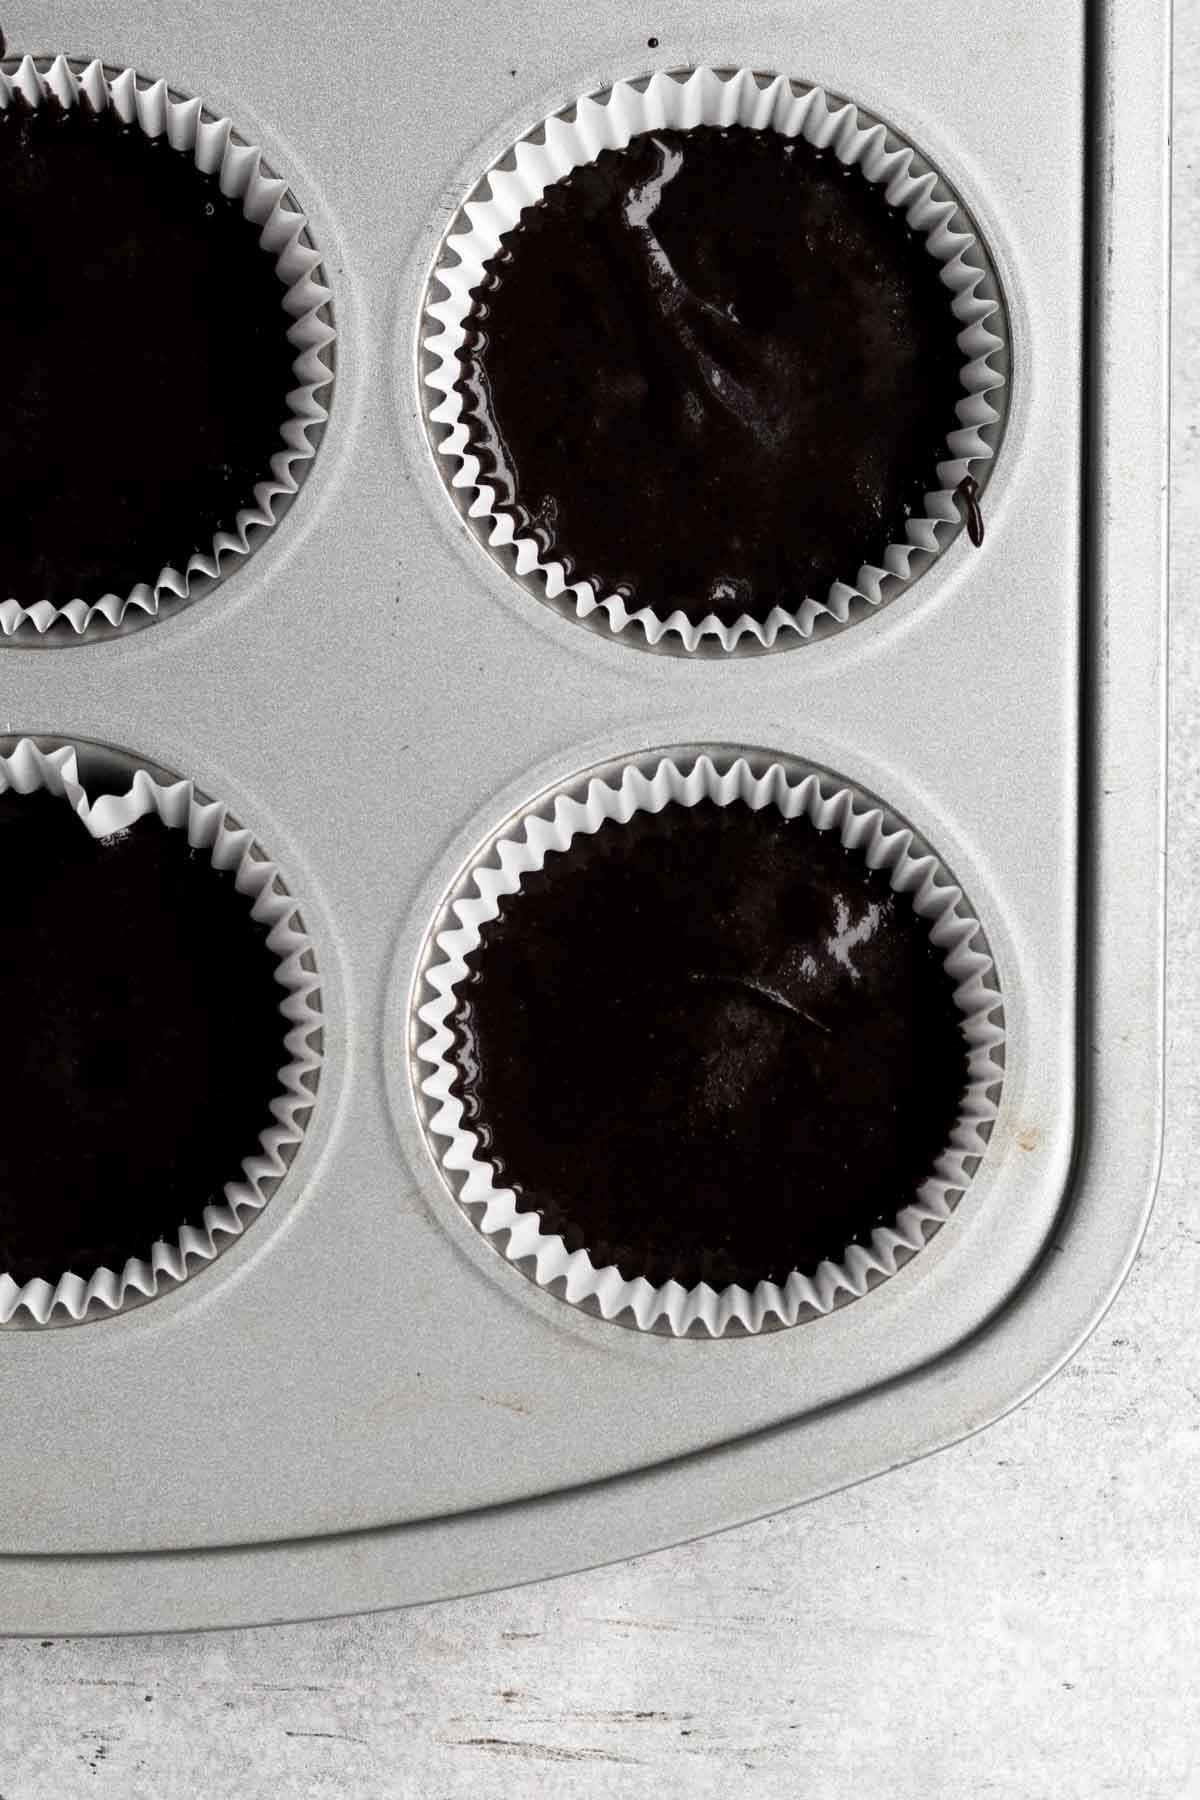 Filling cupcake tins with the chocolate batter.